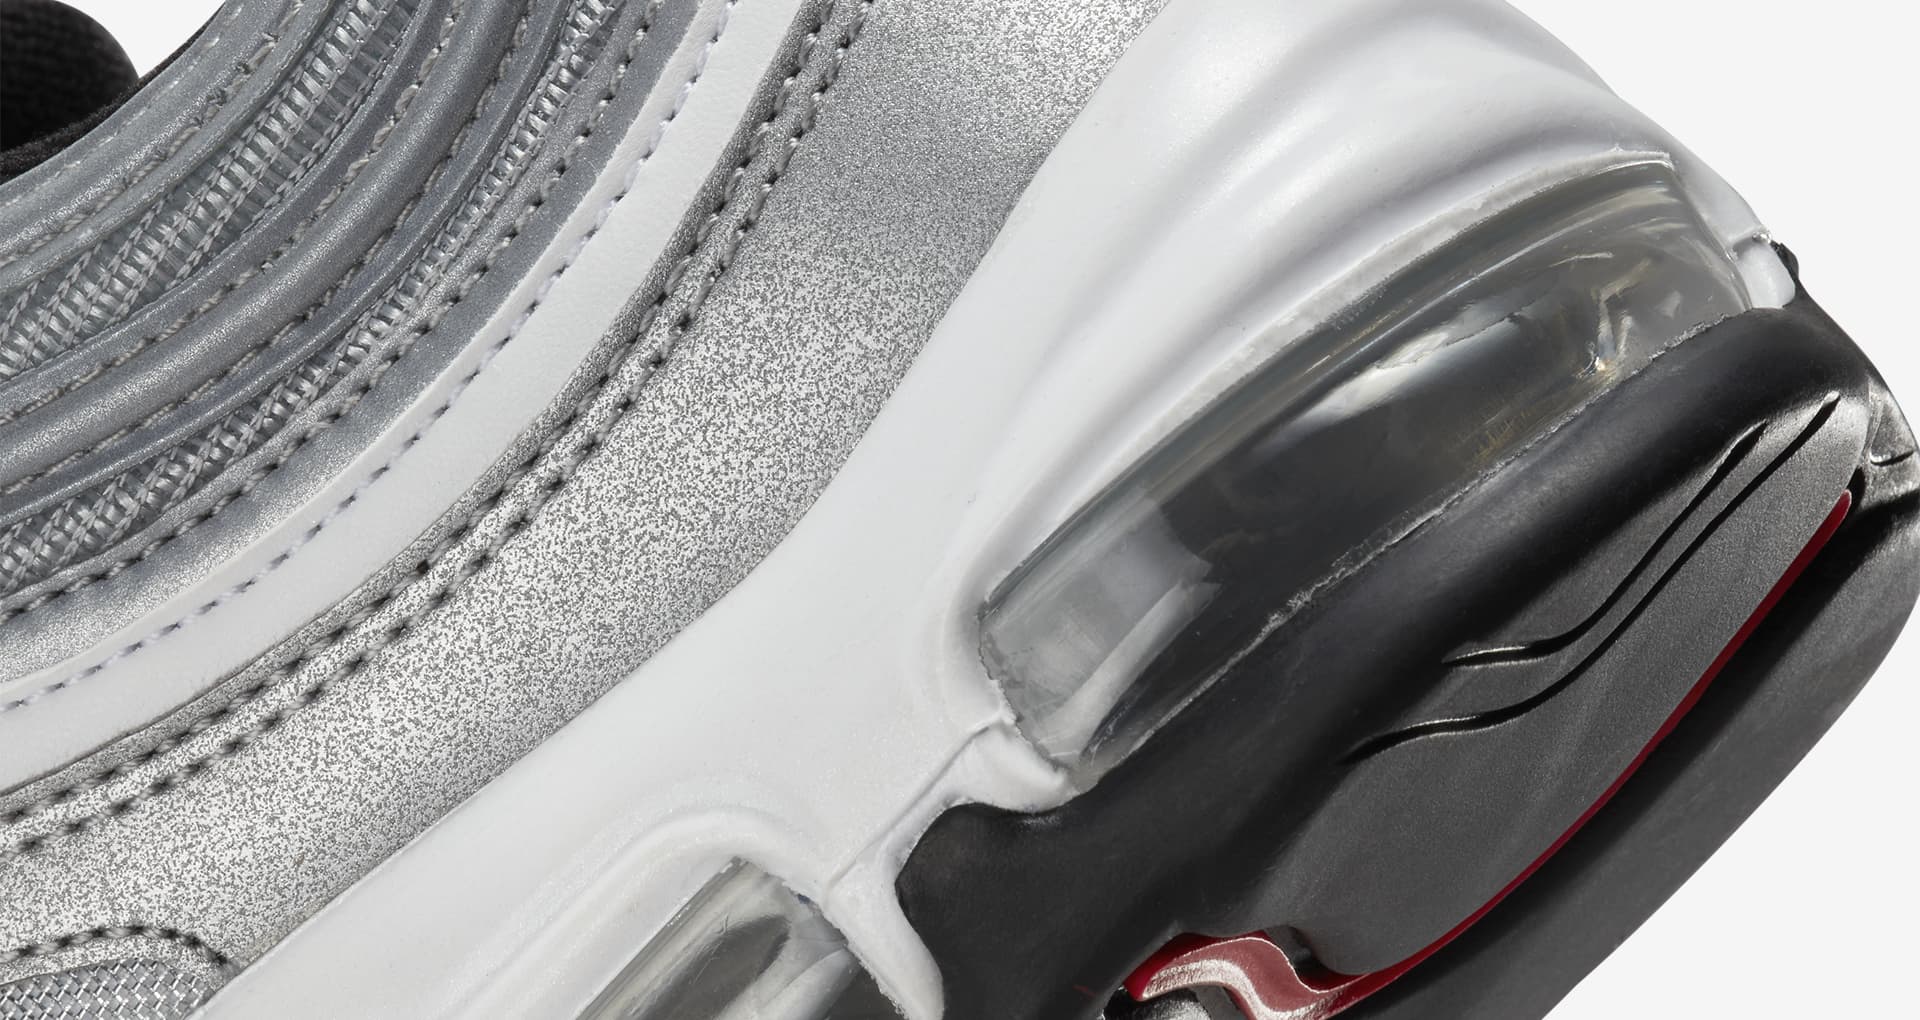 Air Max 97 'Silver Bullet' (DM0028-002) Release Date. Nike SNKRS IN